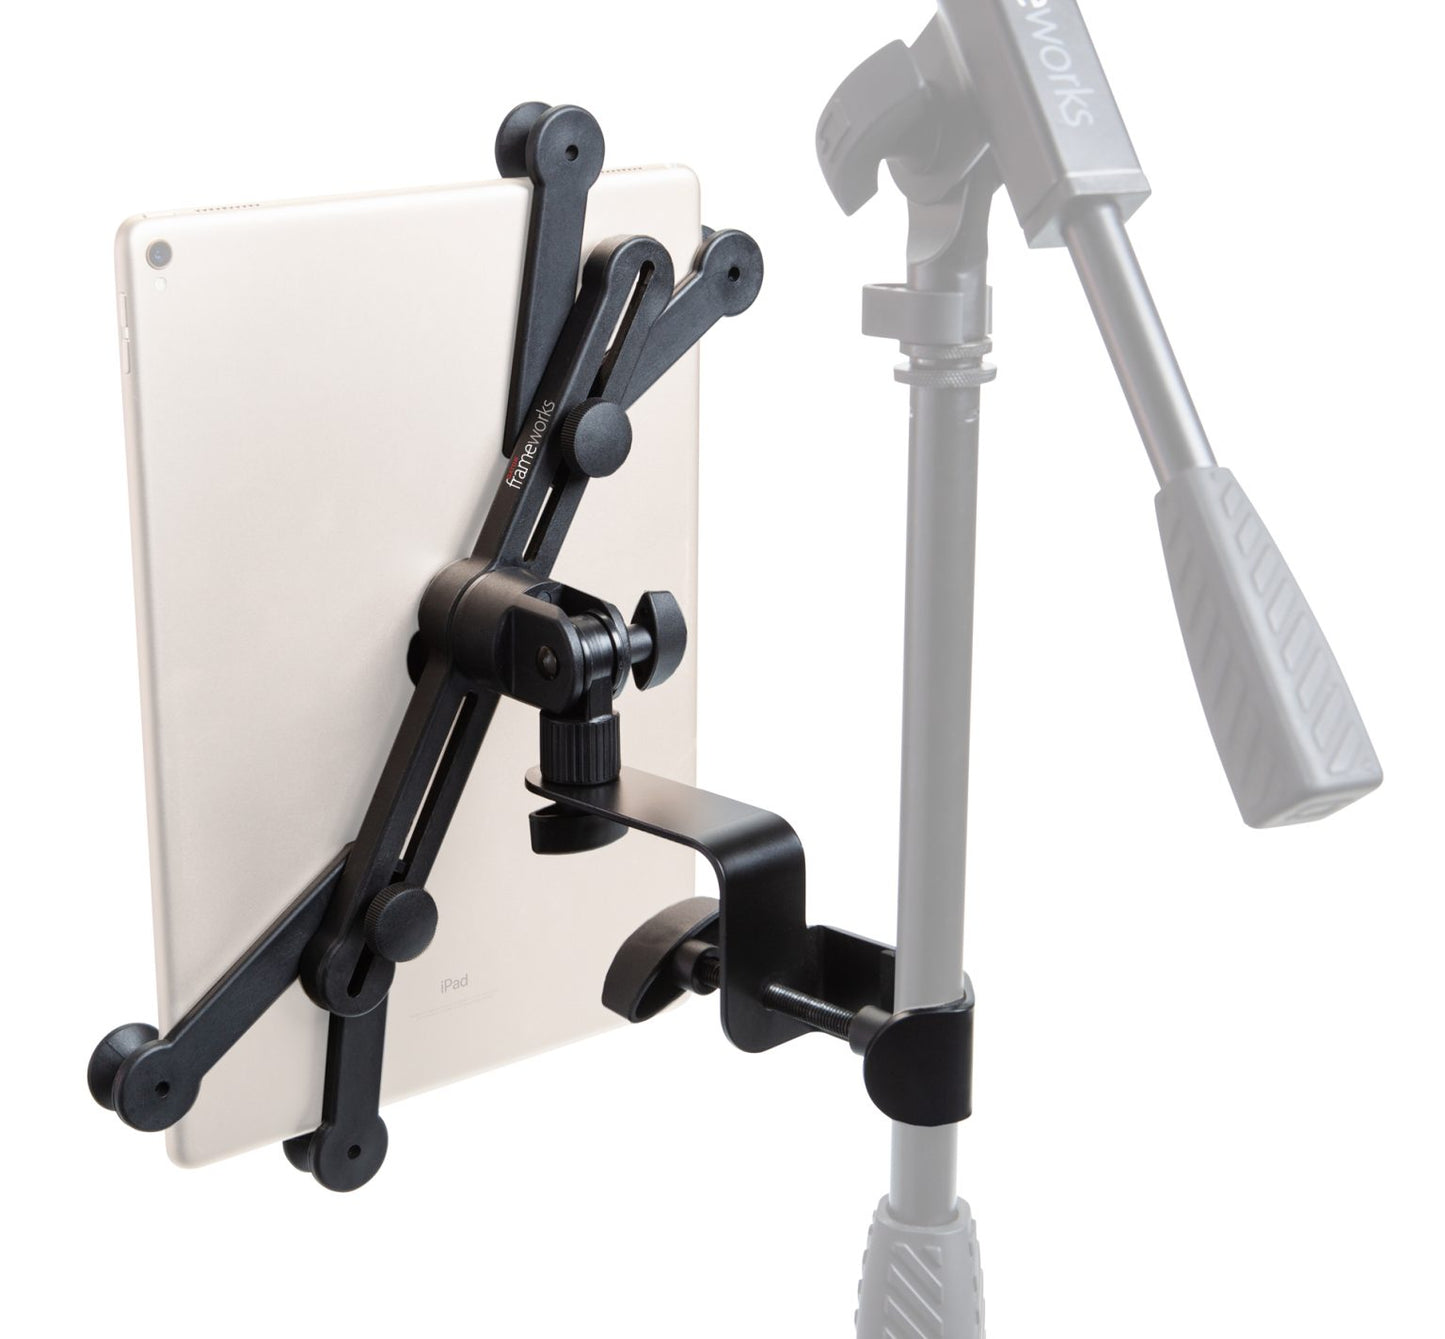 Universal Tablet Clamping Mount W/ 2-Point System